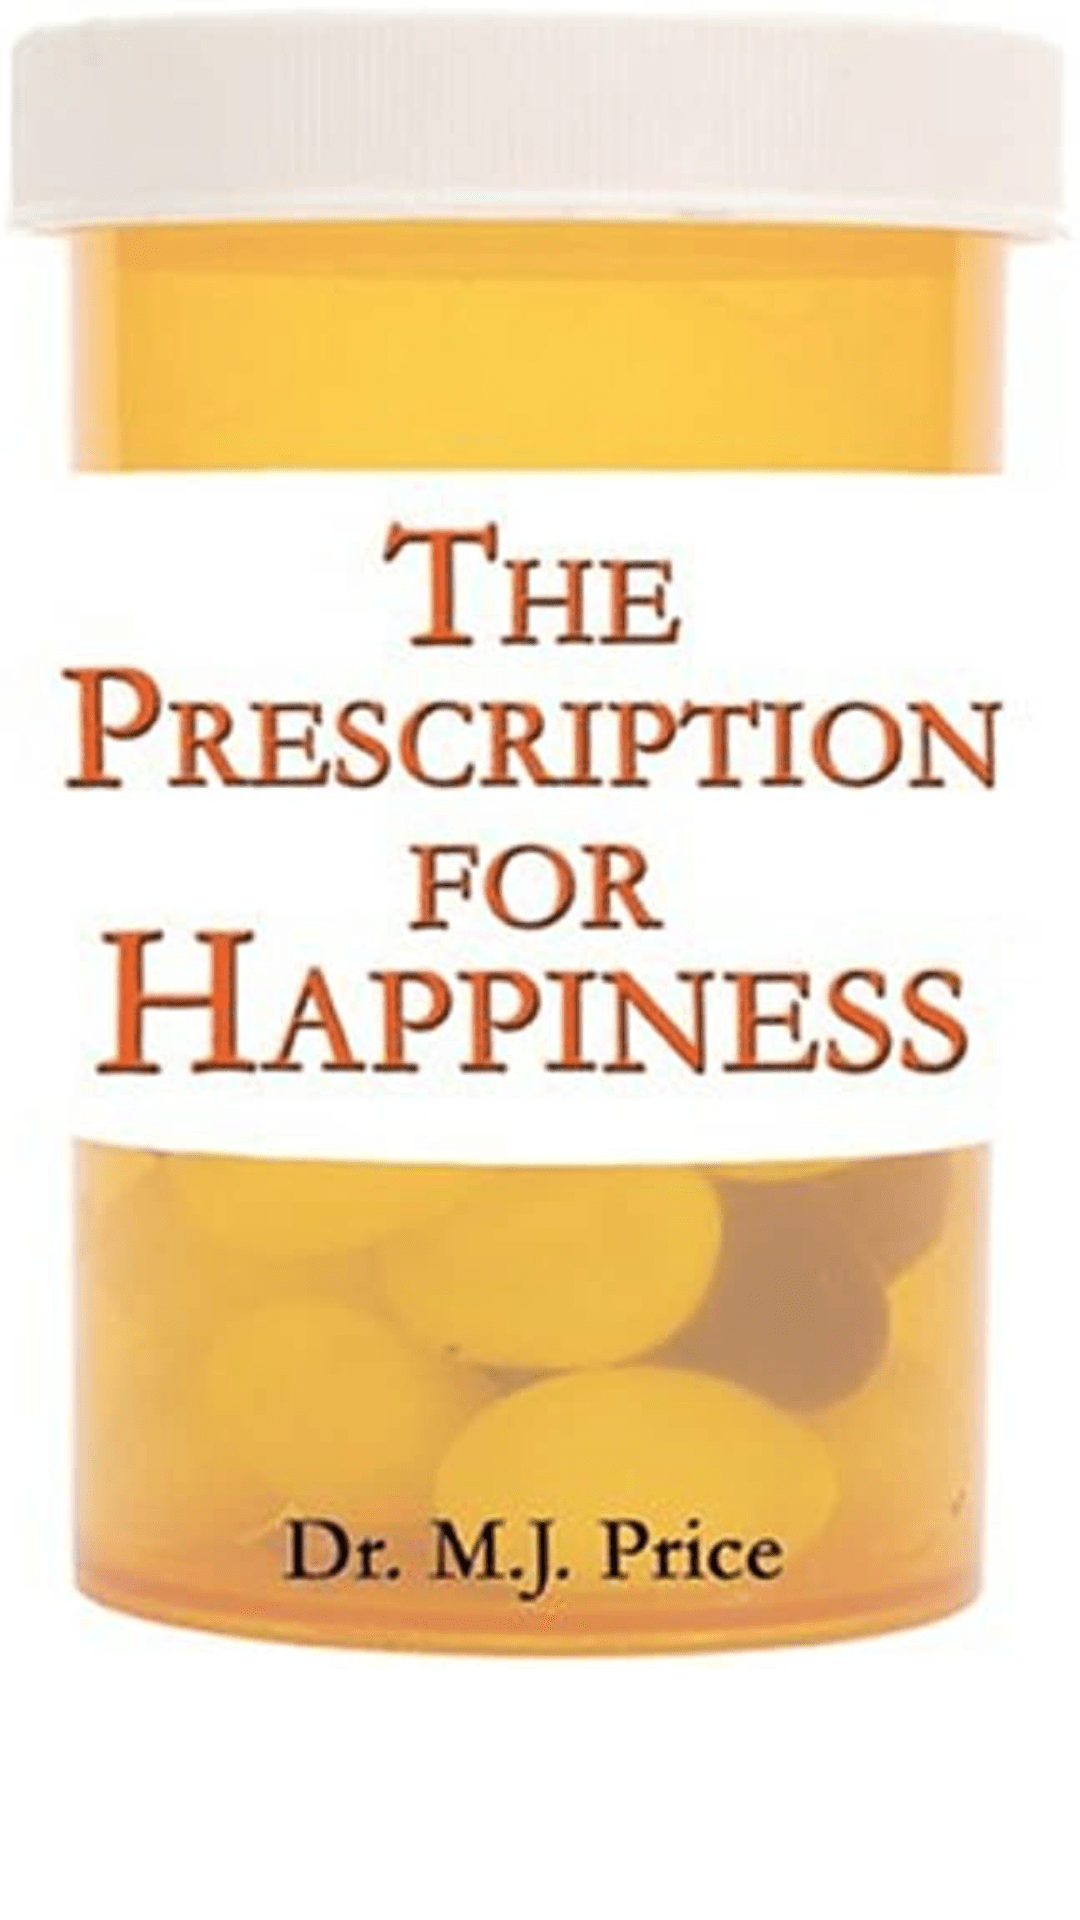 The Prescription for Happiness by M.J. Price